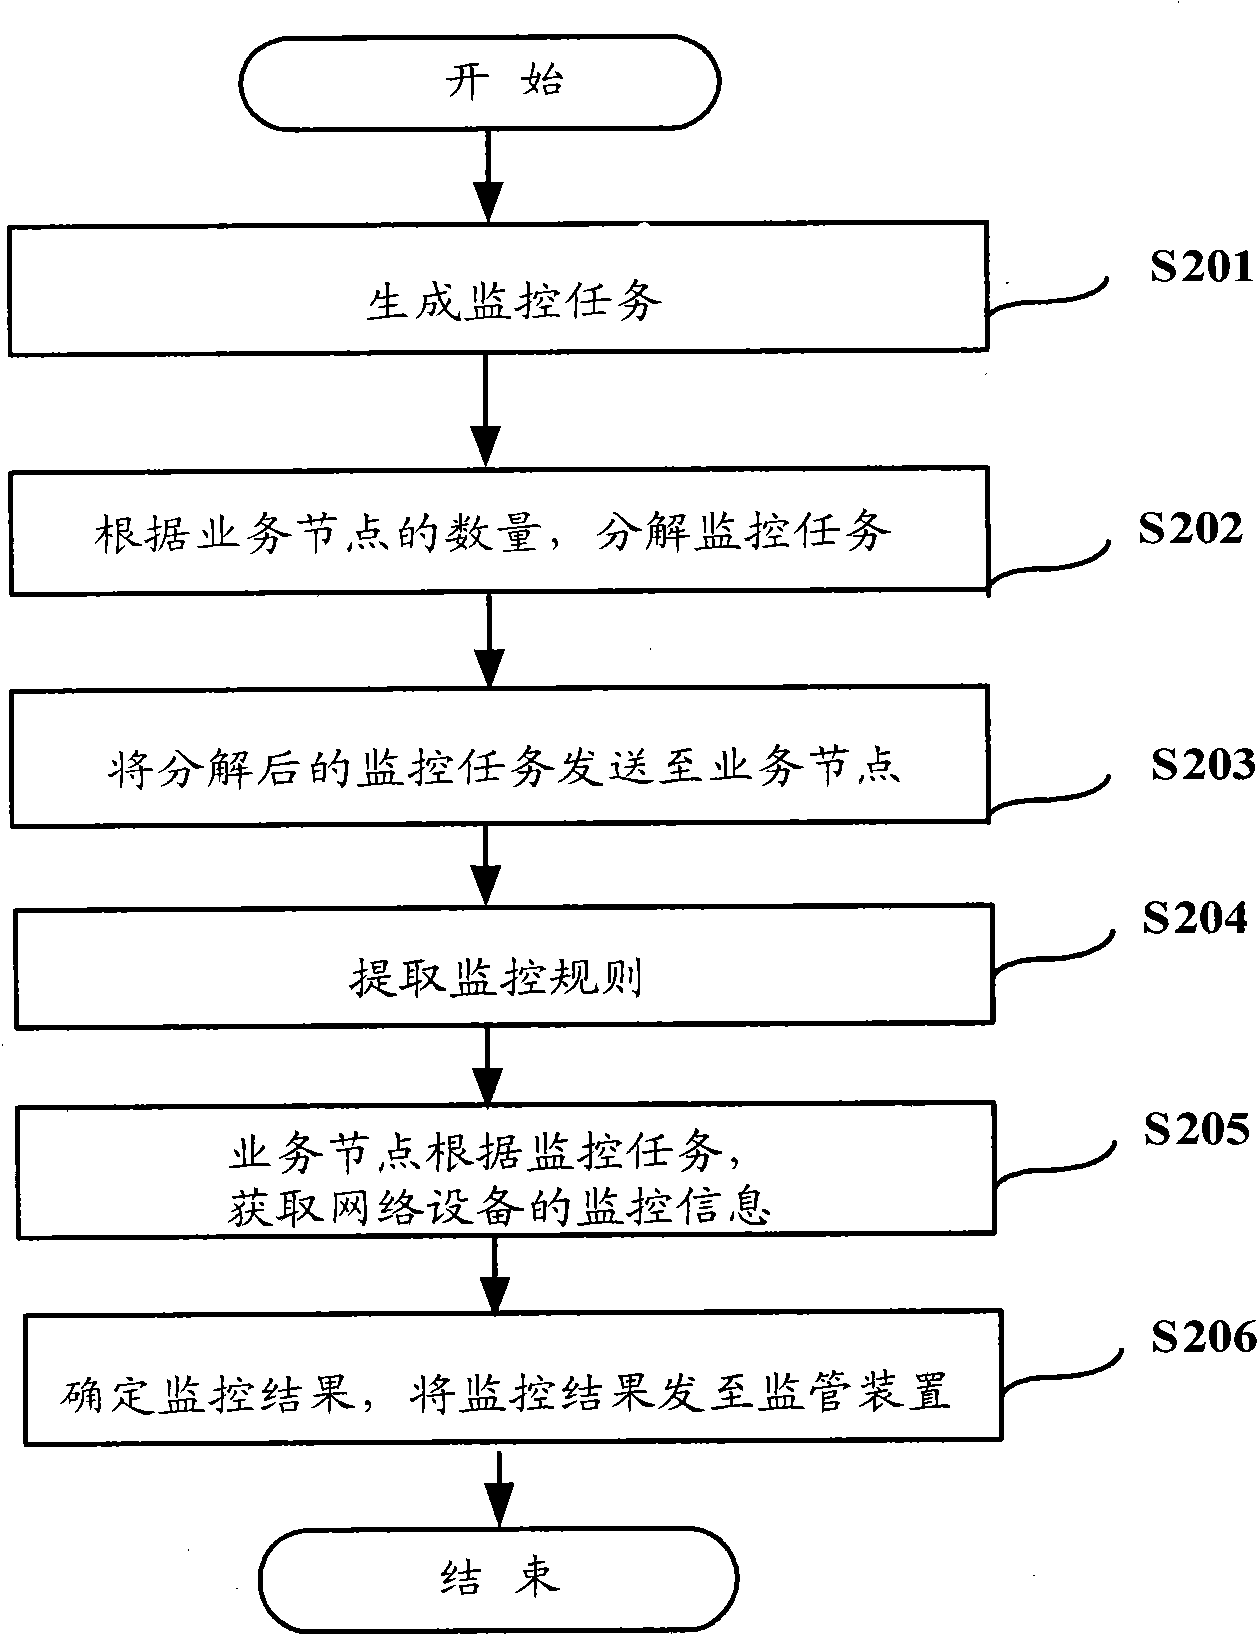 Network equipment supervision method and system